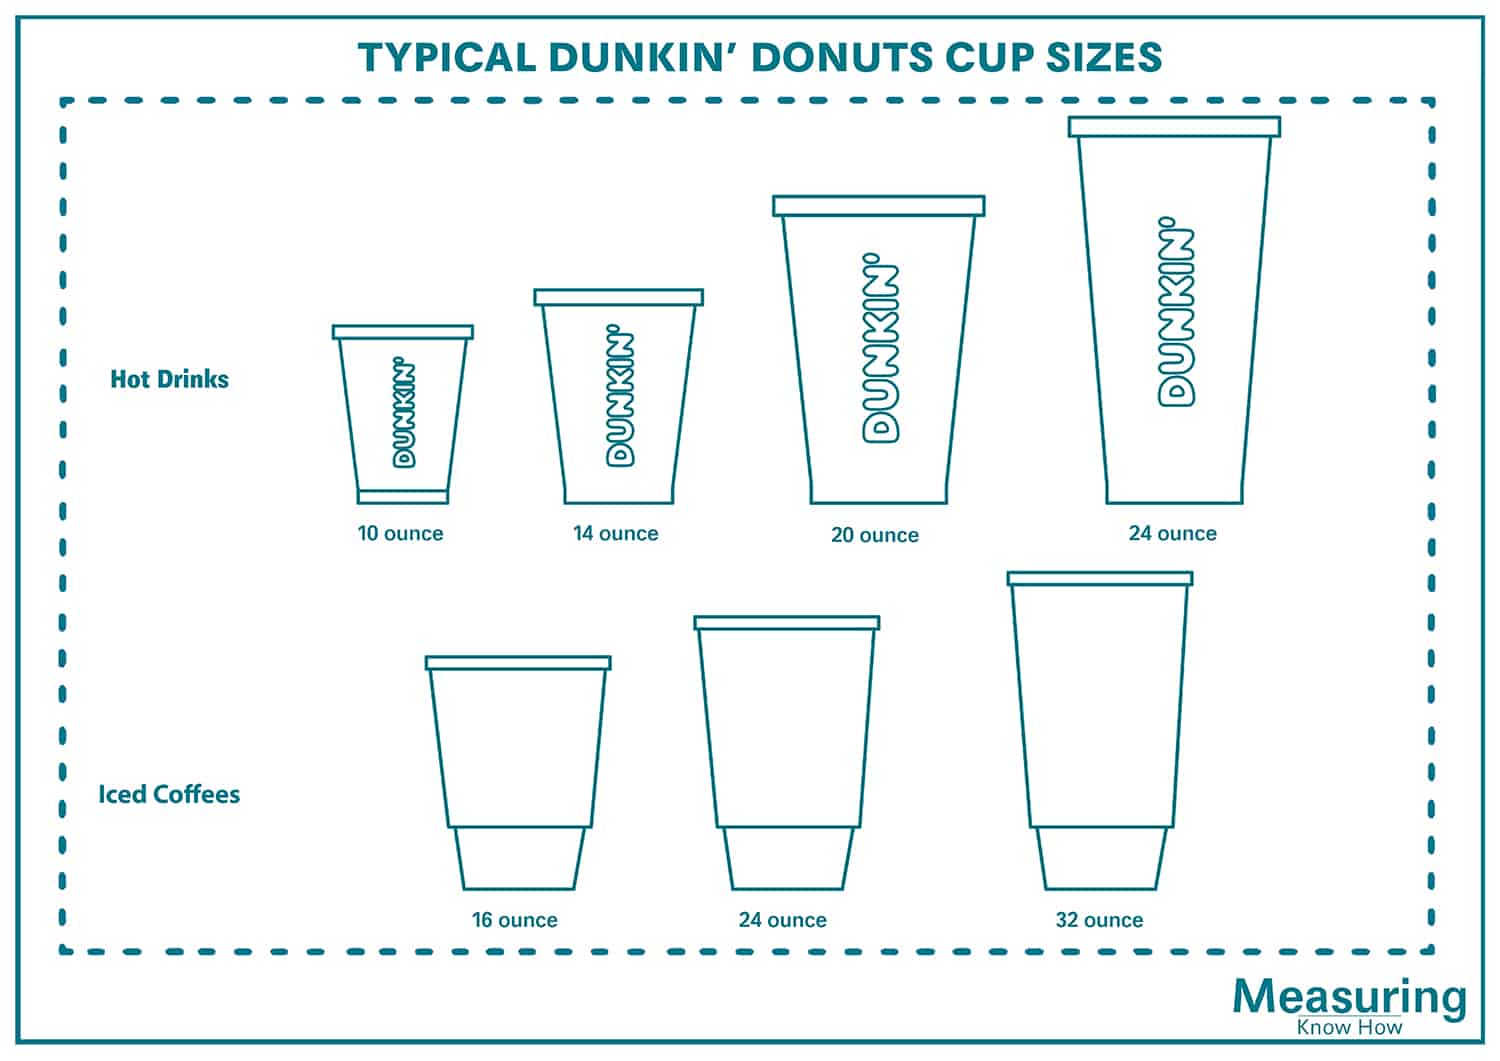 Typical dunkin donuts cup sizes